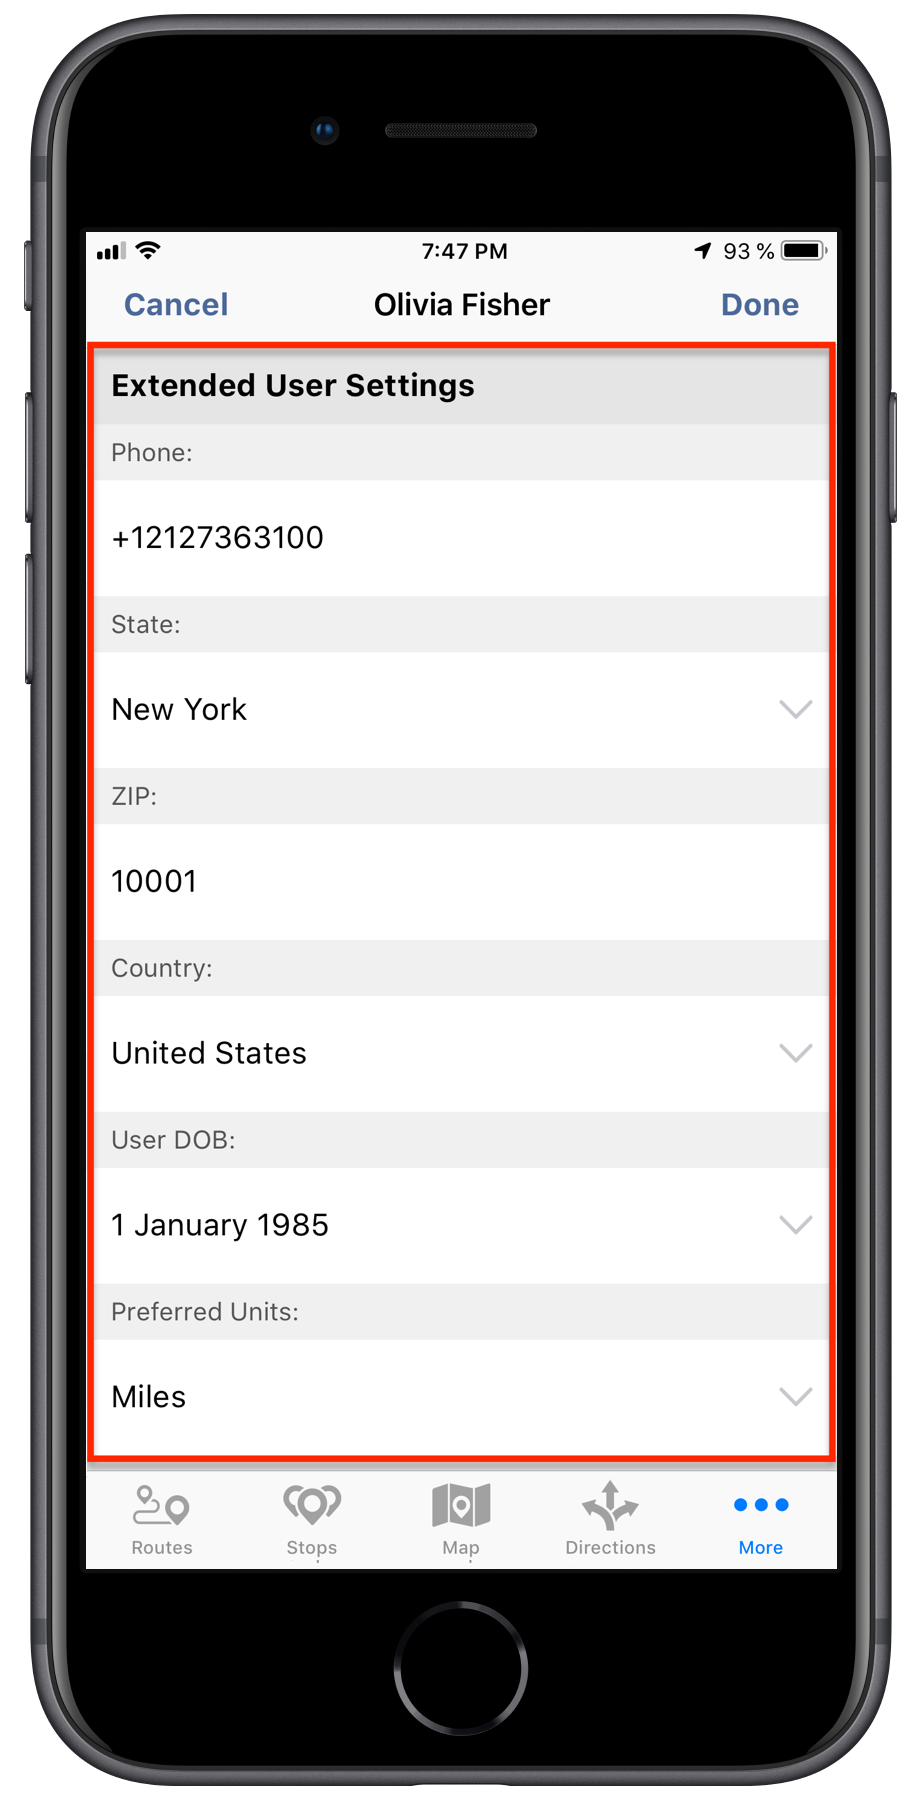 Editing Existing Users/Team Member Accounts Using the Route4Me iPhone App